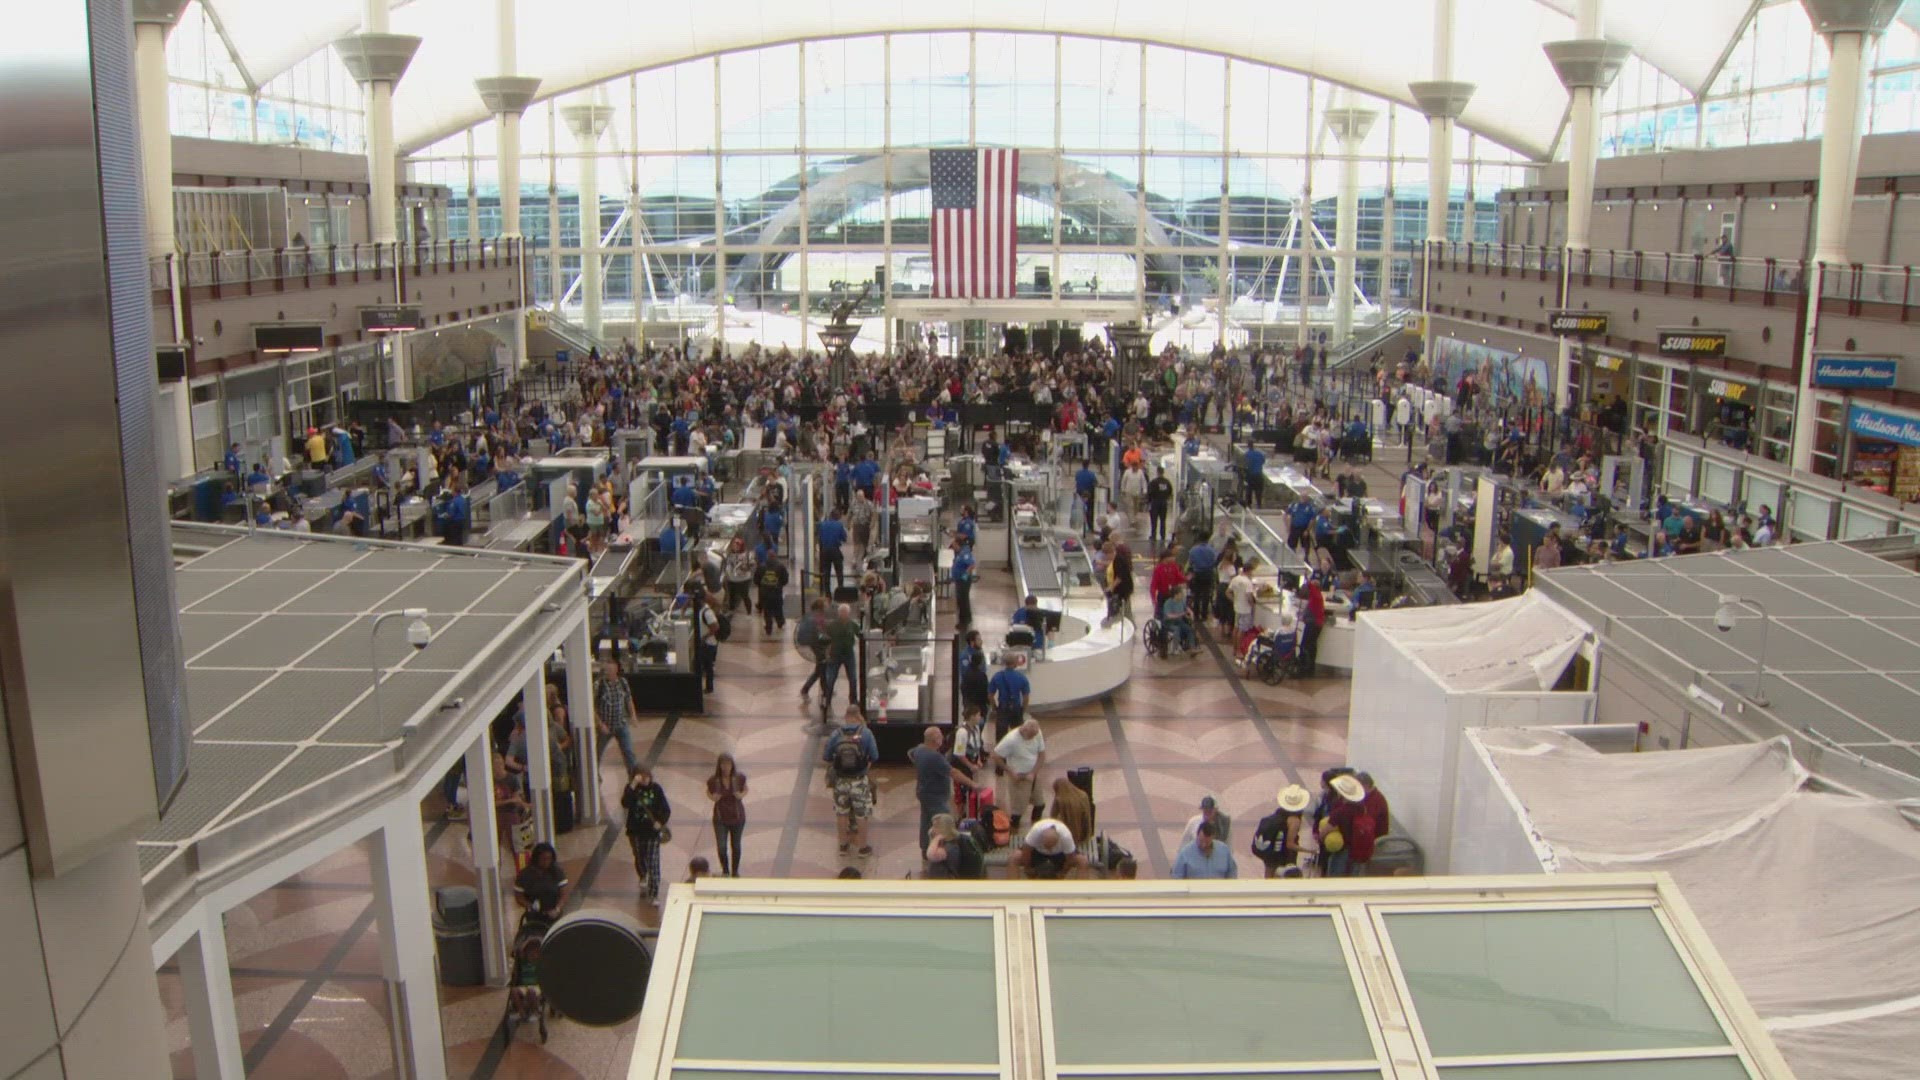 Colorado lawmakers sent a letter to the TSA this week, pressing them for more transparency around their decisions on what level of resources to provide airports.